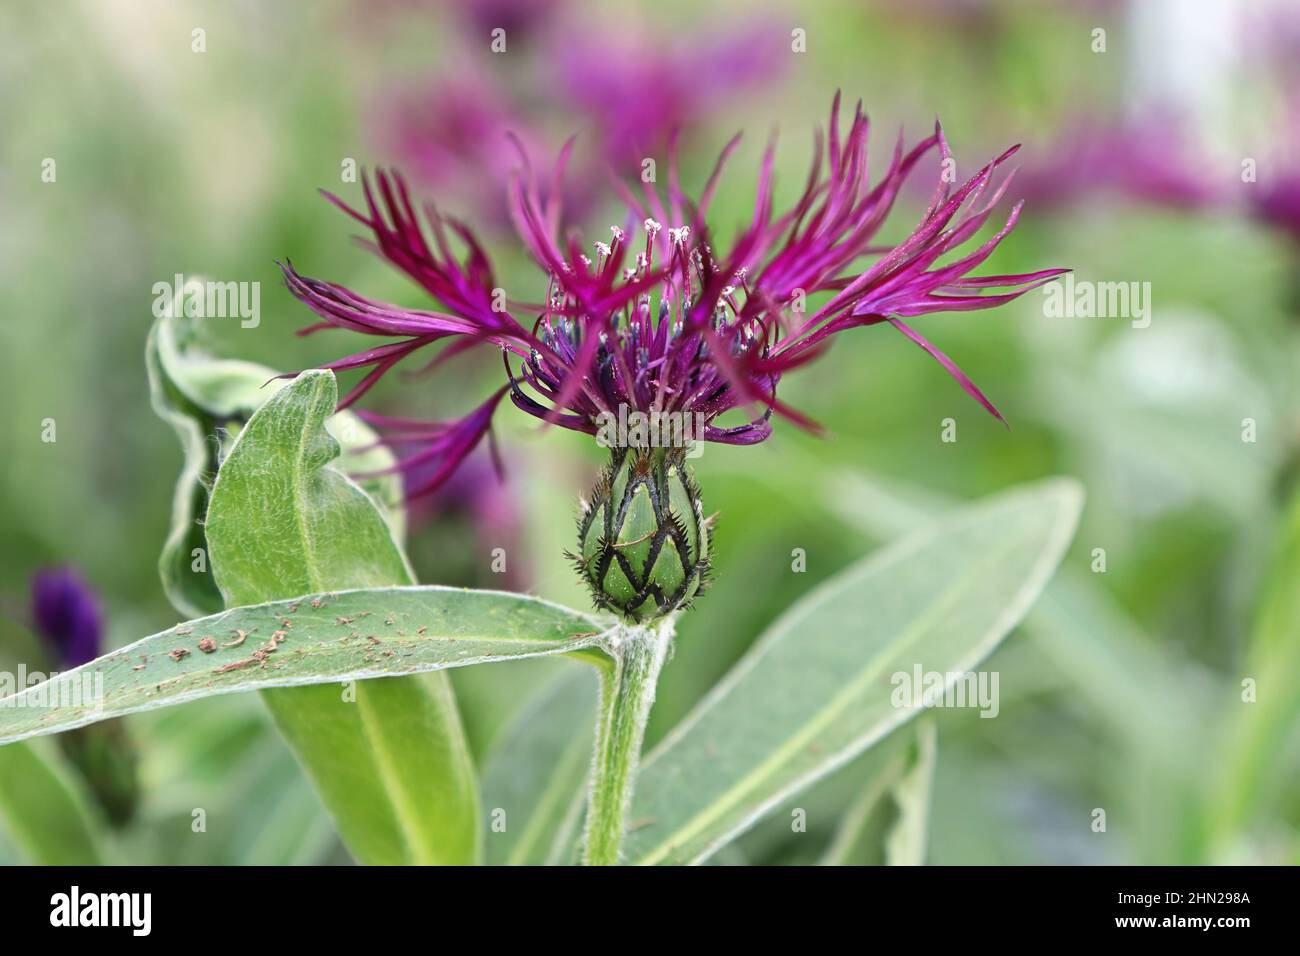 Closeup side view of a purple knapweed flower. Stock Photo